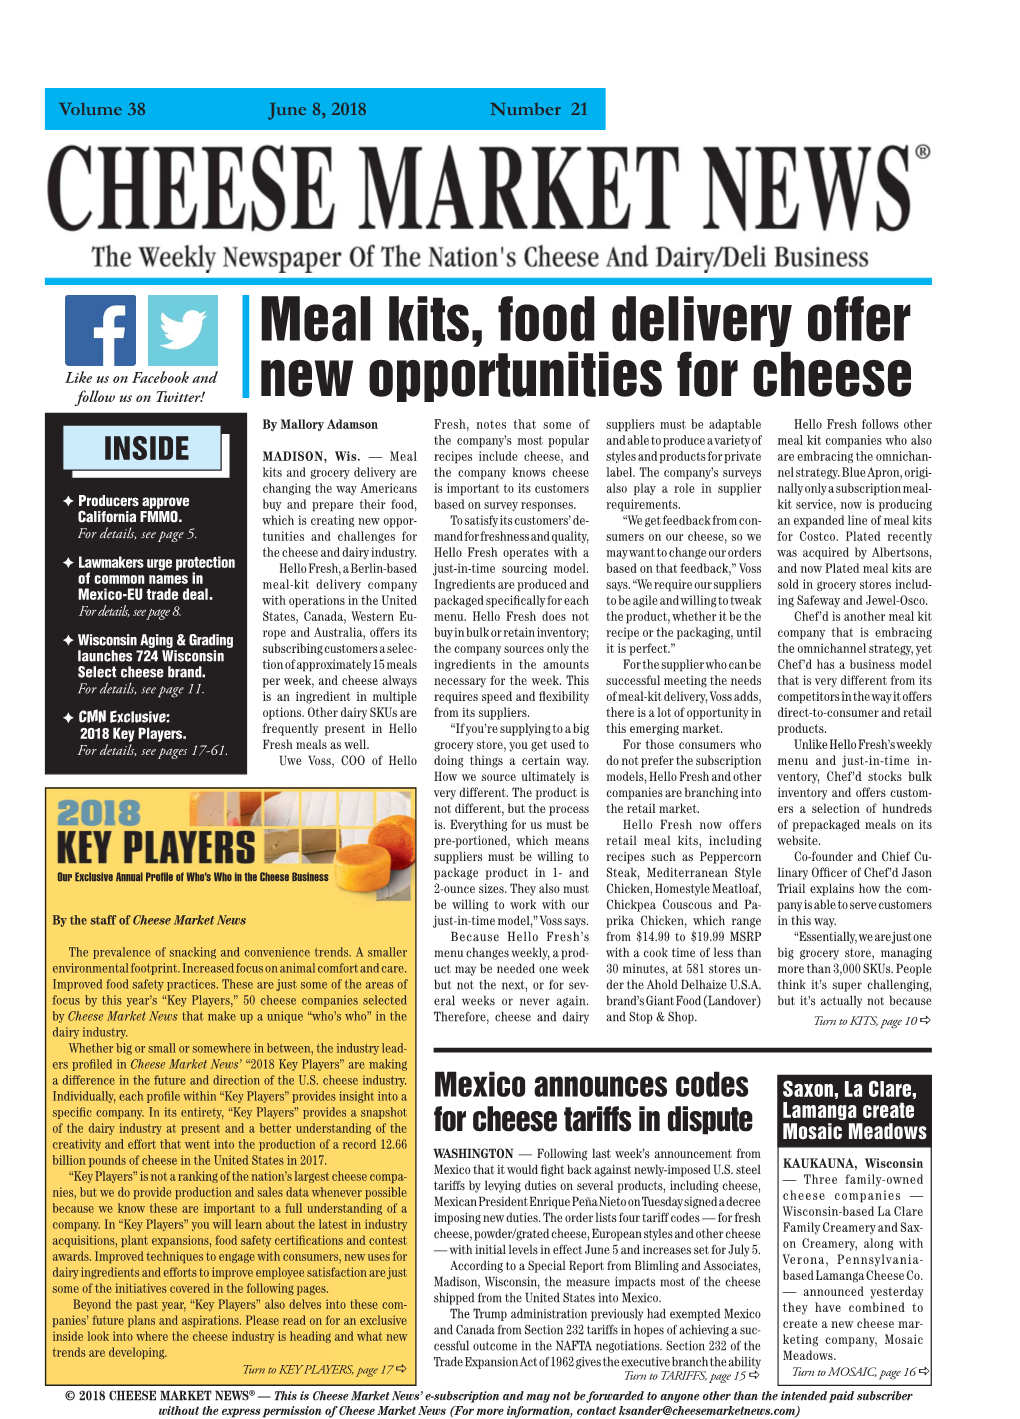 Meal Kits, Food Delivery Offer New Opportunities for Cheese